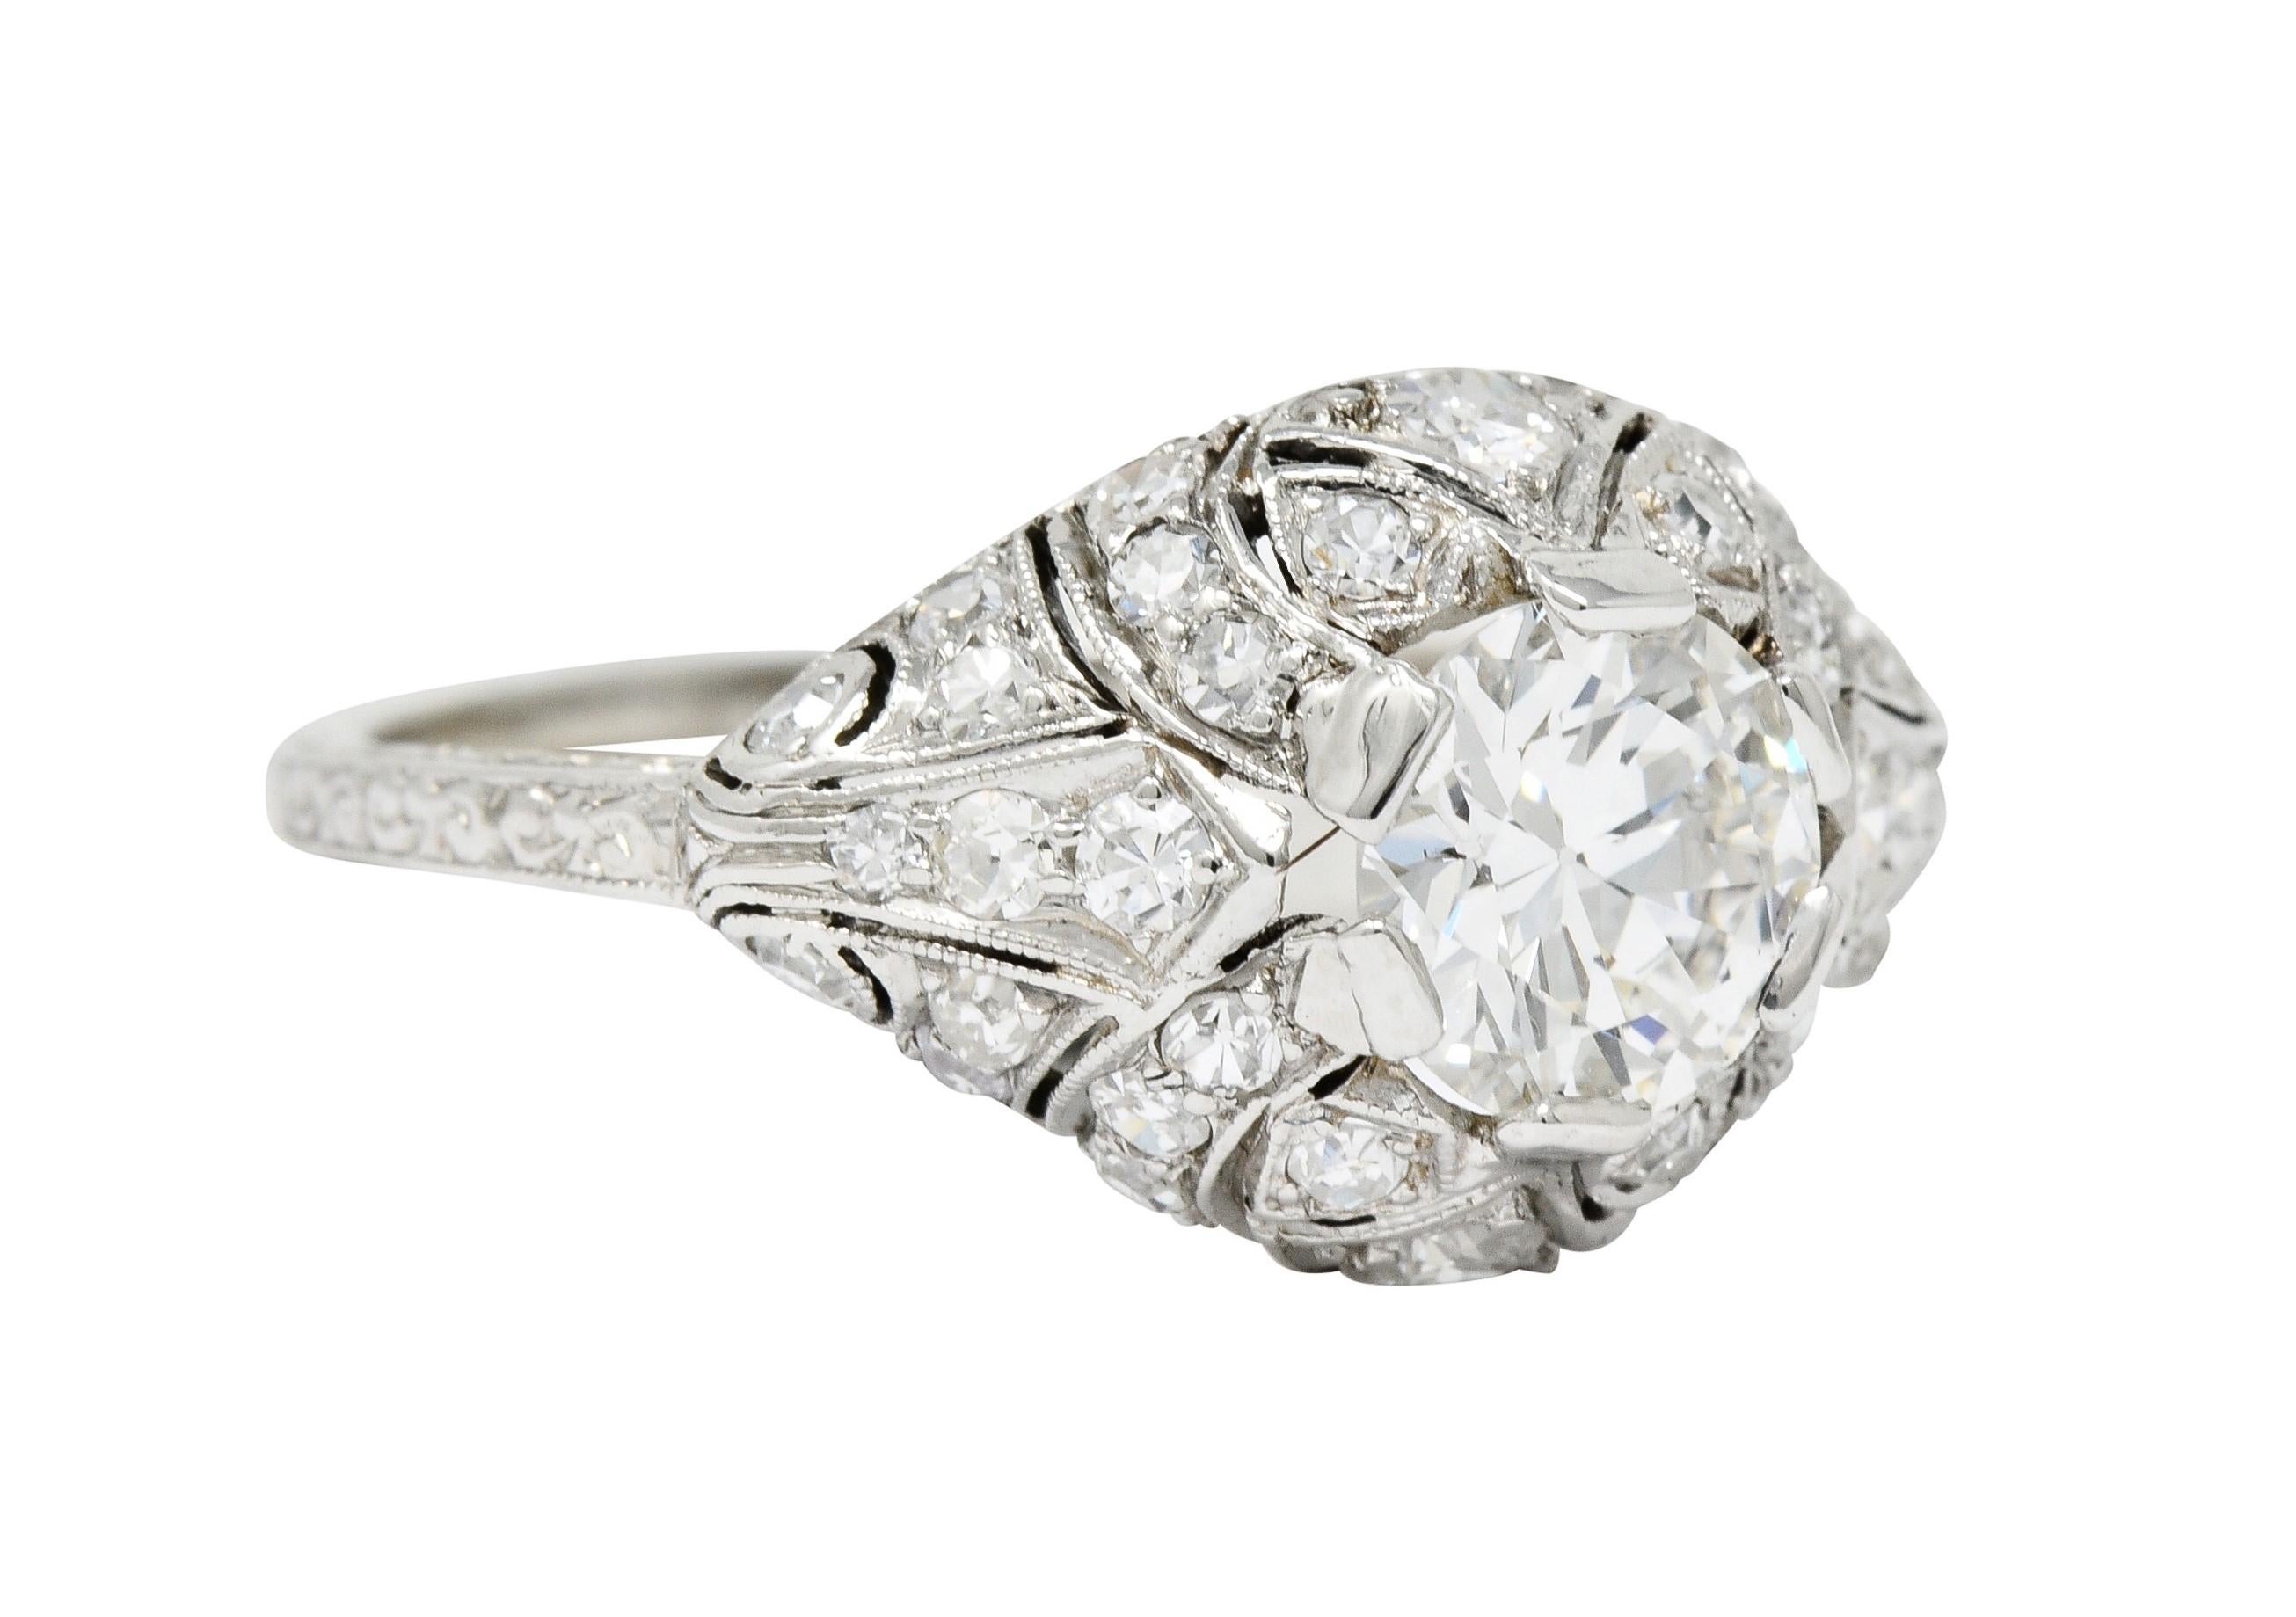 Centering a transitional cut diamond weighing 1.15 carat; H color with SI1 clarity

Set low in pierced bombé mounting with milgrain detail and scrolled engraving

Accented throughout by round brilliant, single, and old European cut